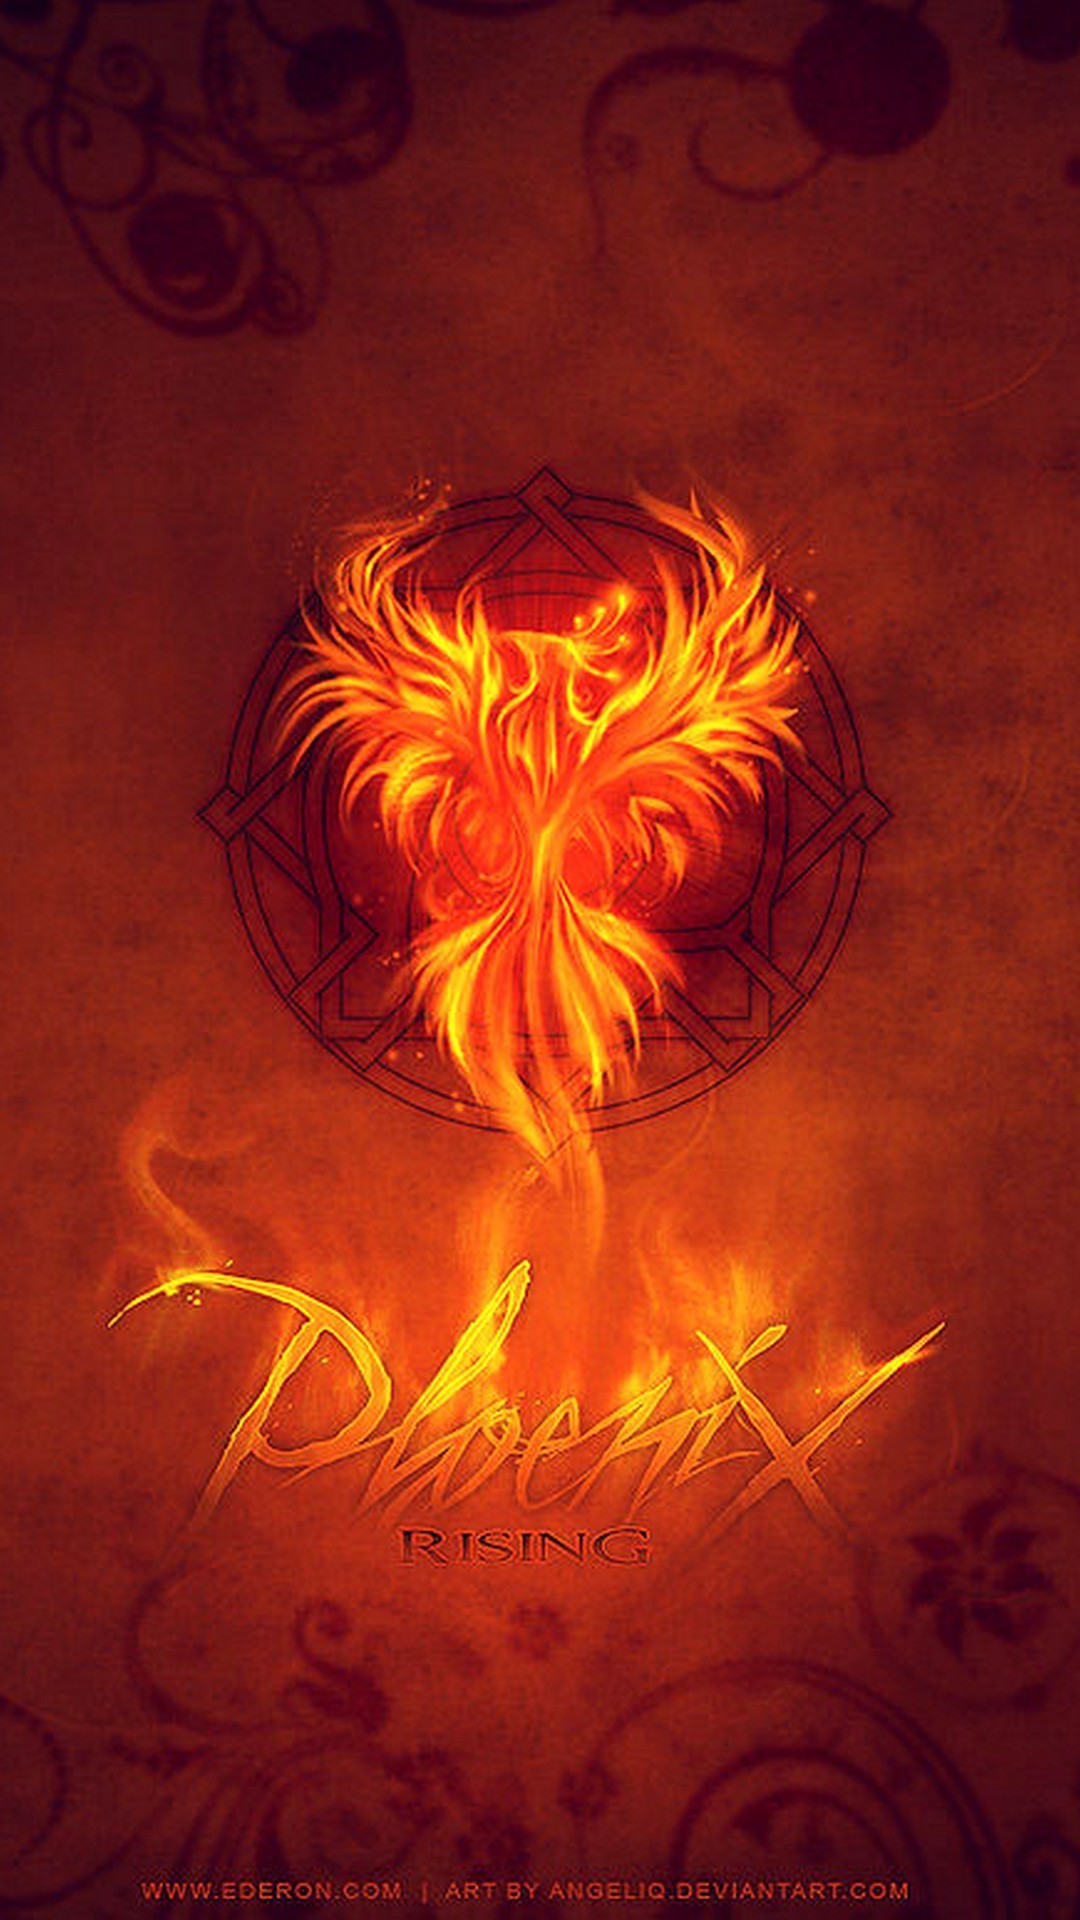 Phoenix Bird Images Android Wallpaper with image resolution 1080x1920 pixel. You can make this wallpaper for your Android backgrounds, Tablet, Smartphones Screensavers and Mobile Phone Lock Screen